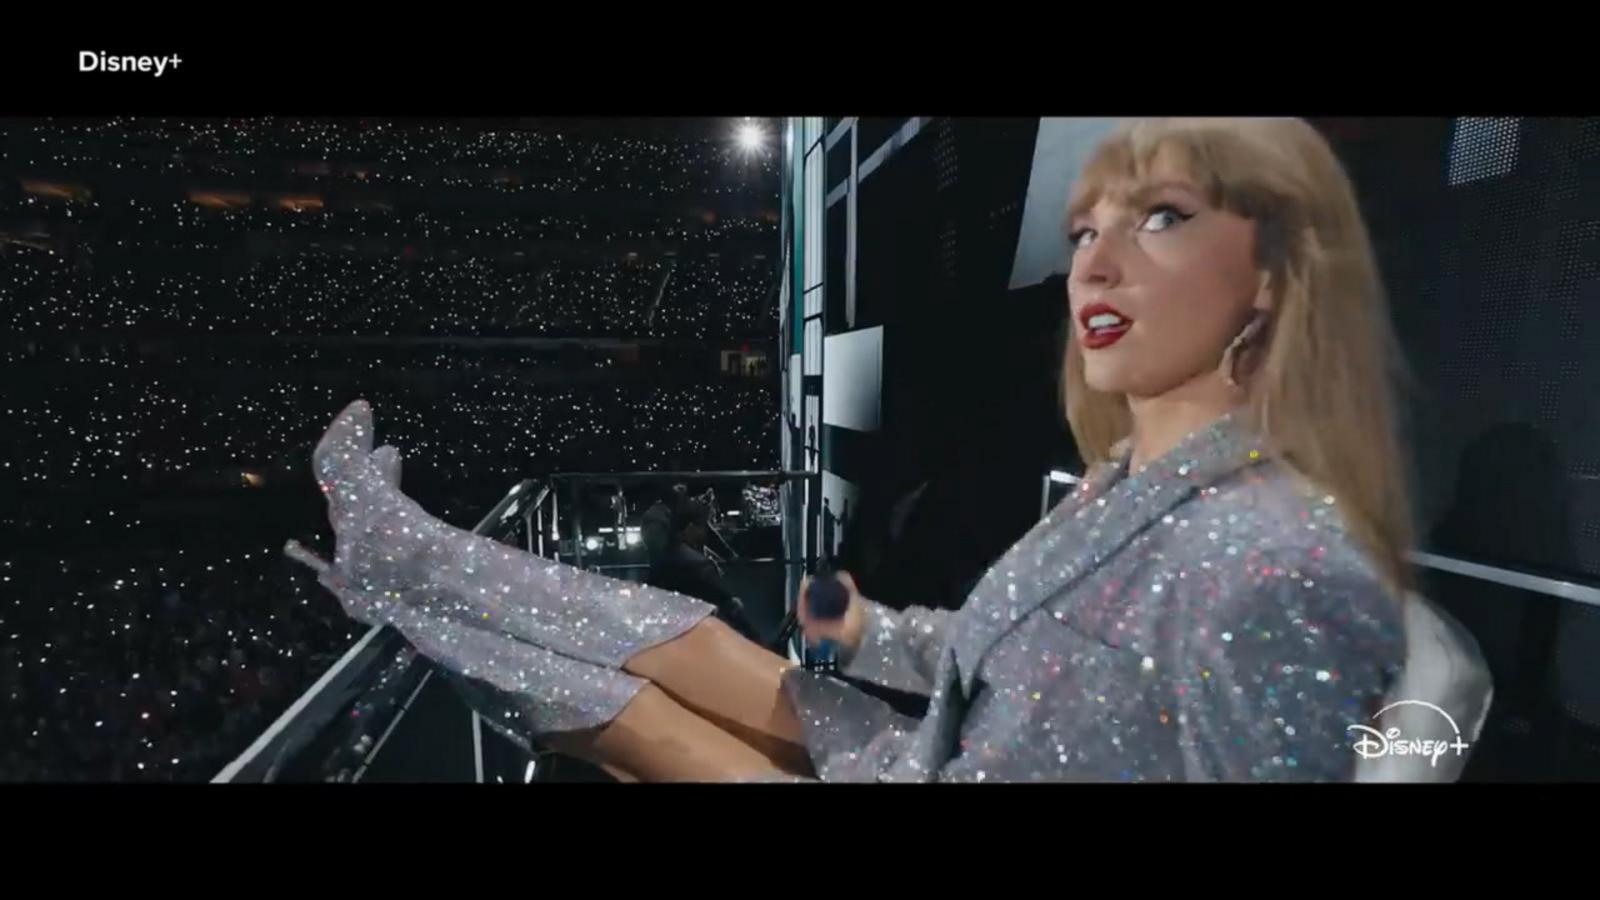 VIDEO: Taylor Swift lands on Forbes billionaire list for 1st time